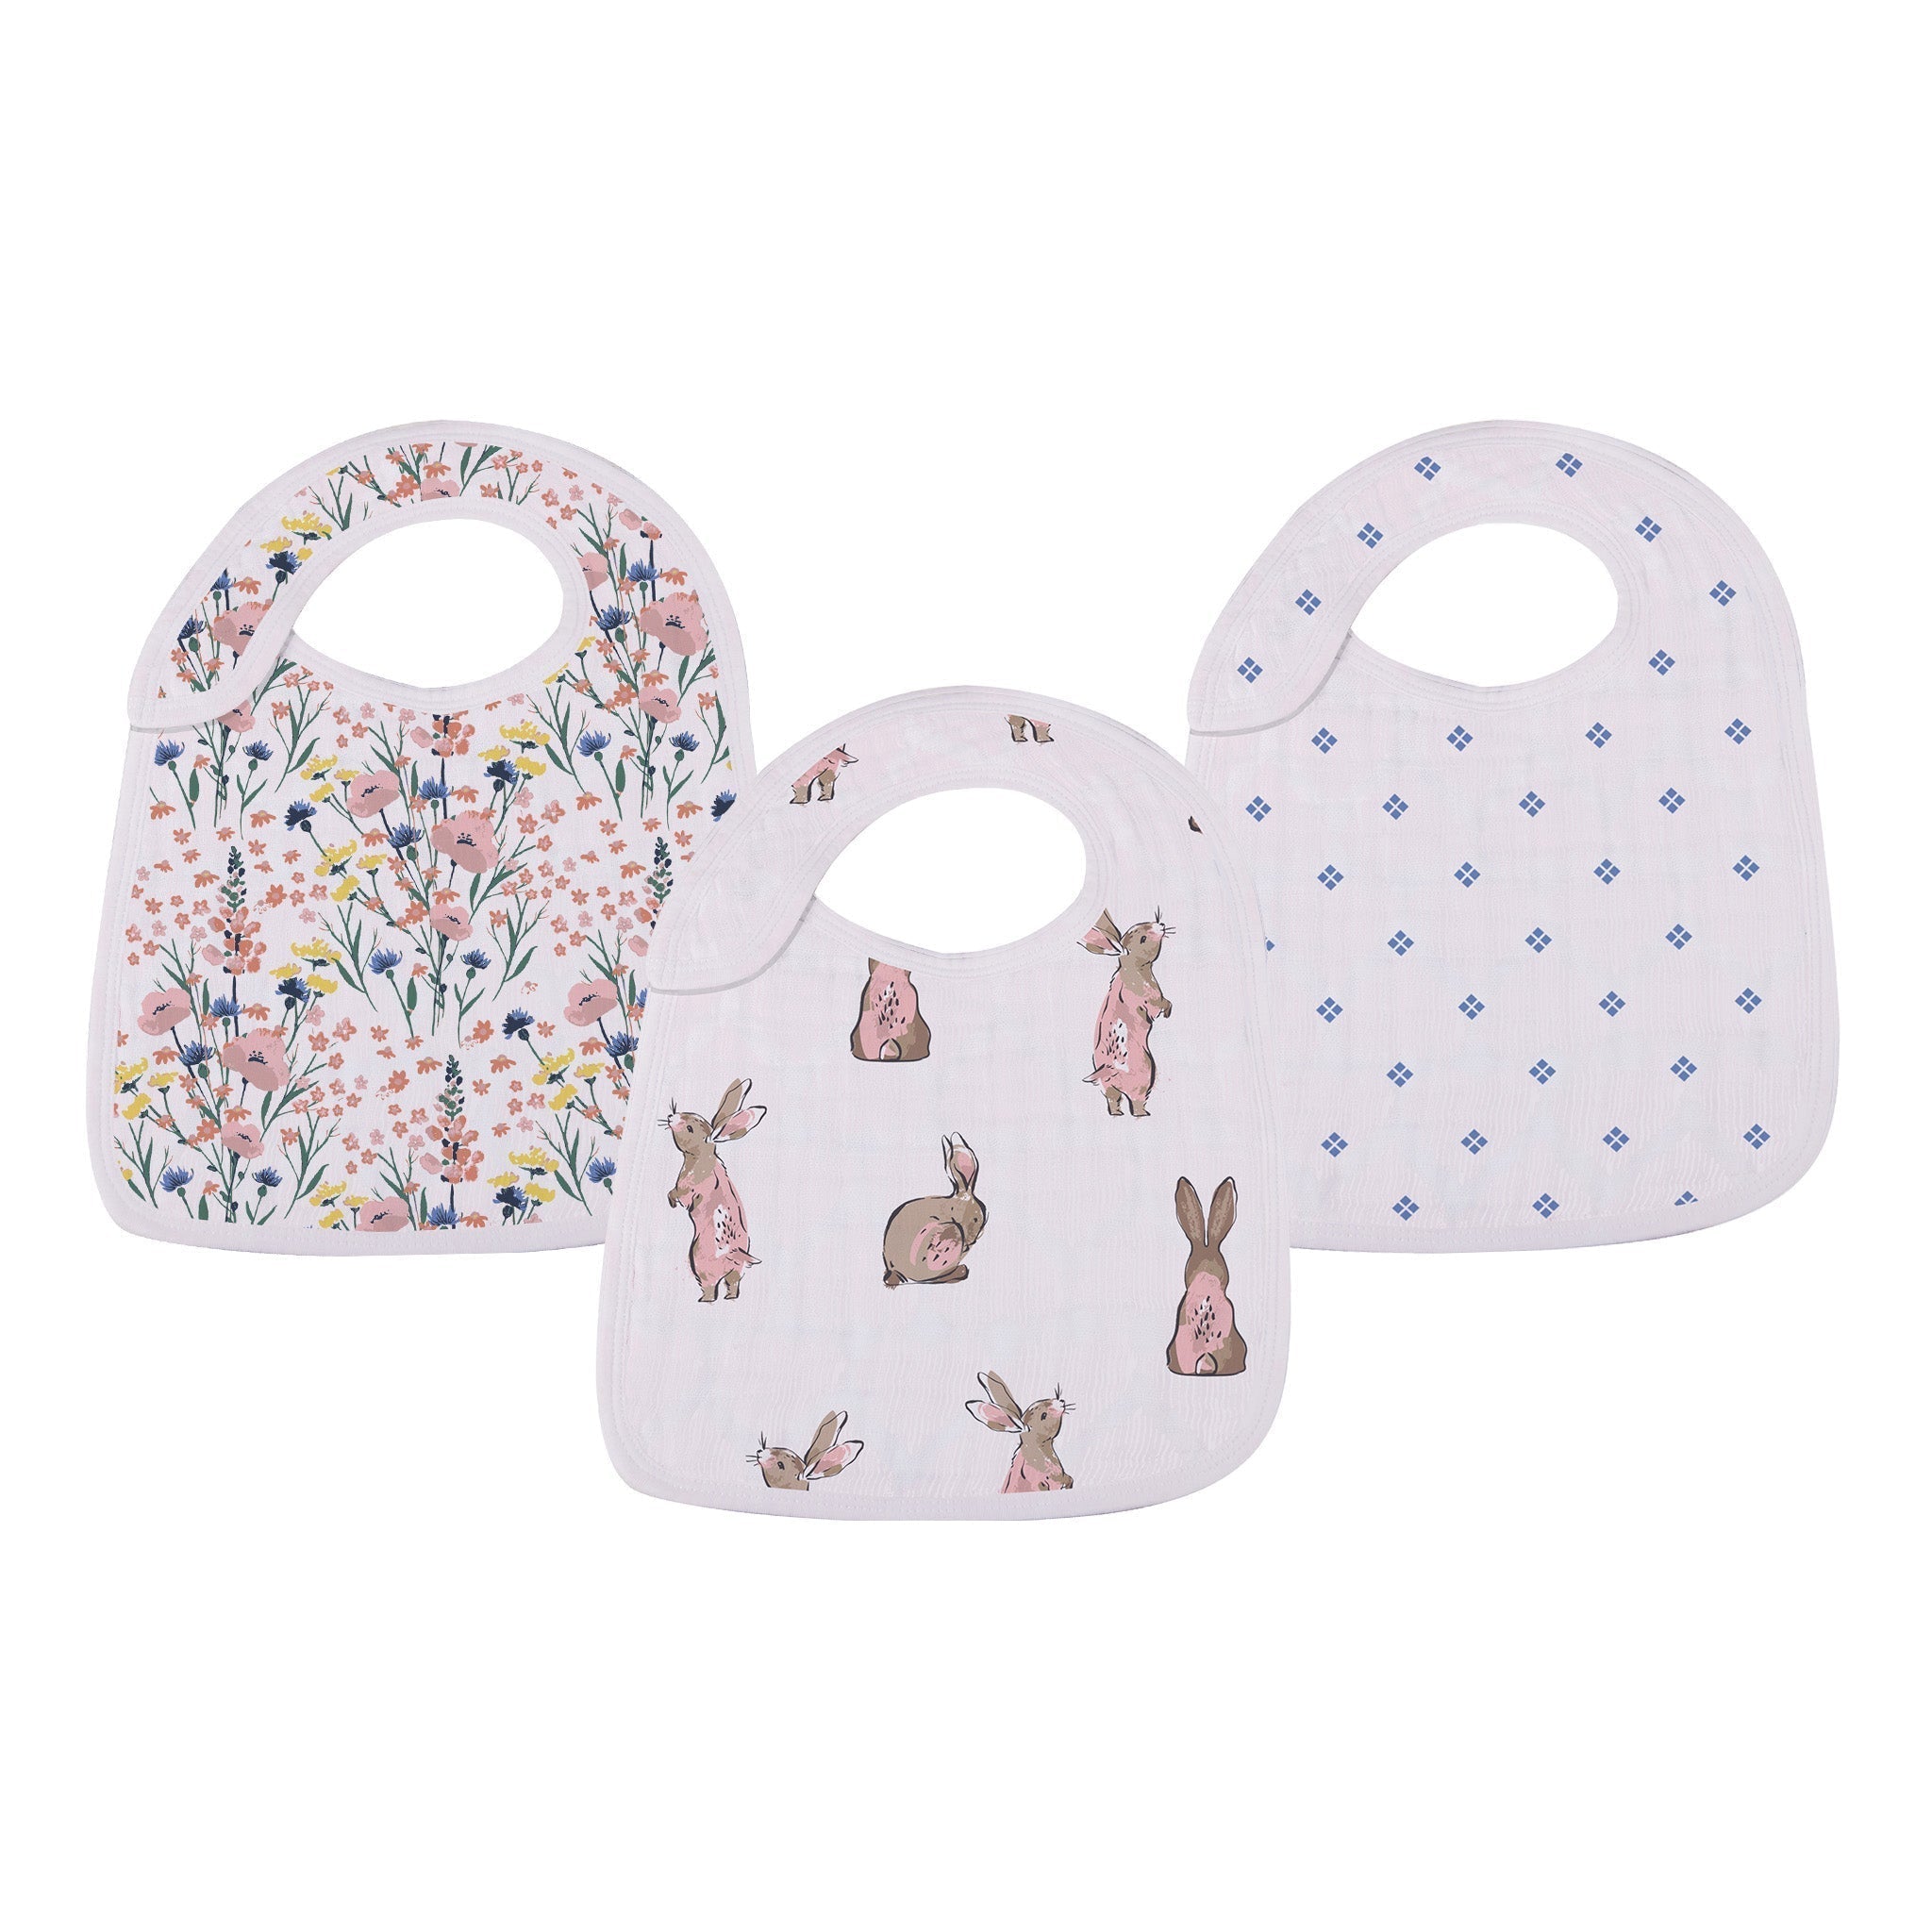 Set of three snap bibs with wildflowers and bunnies